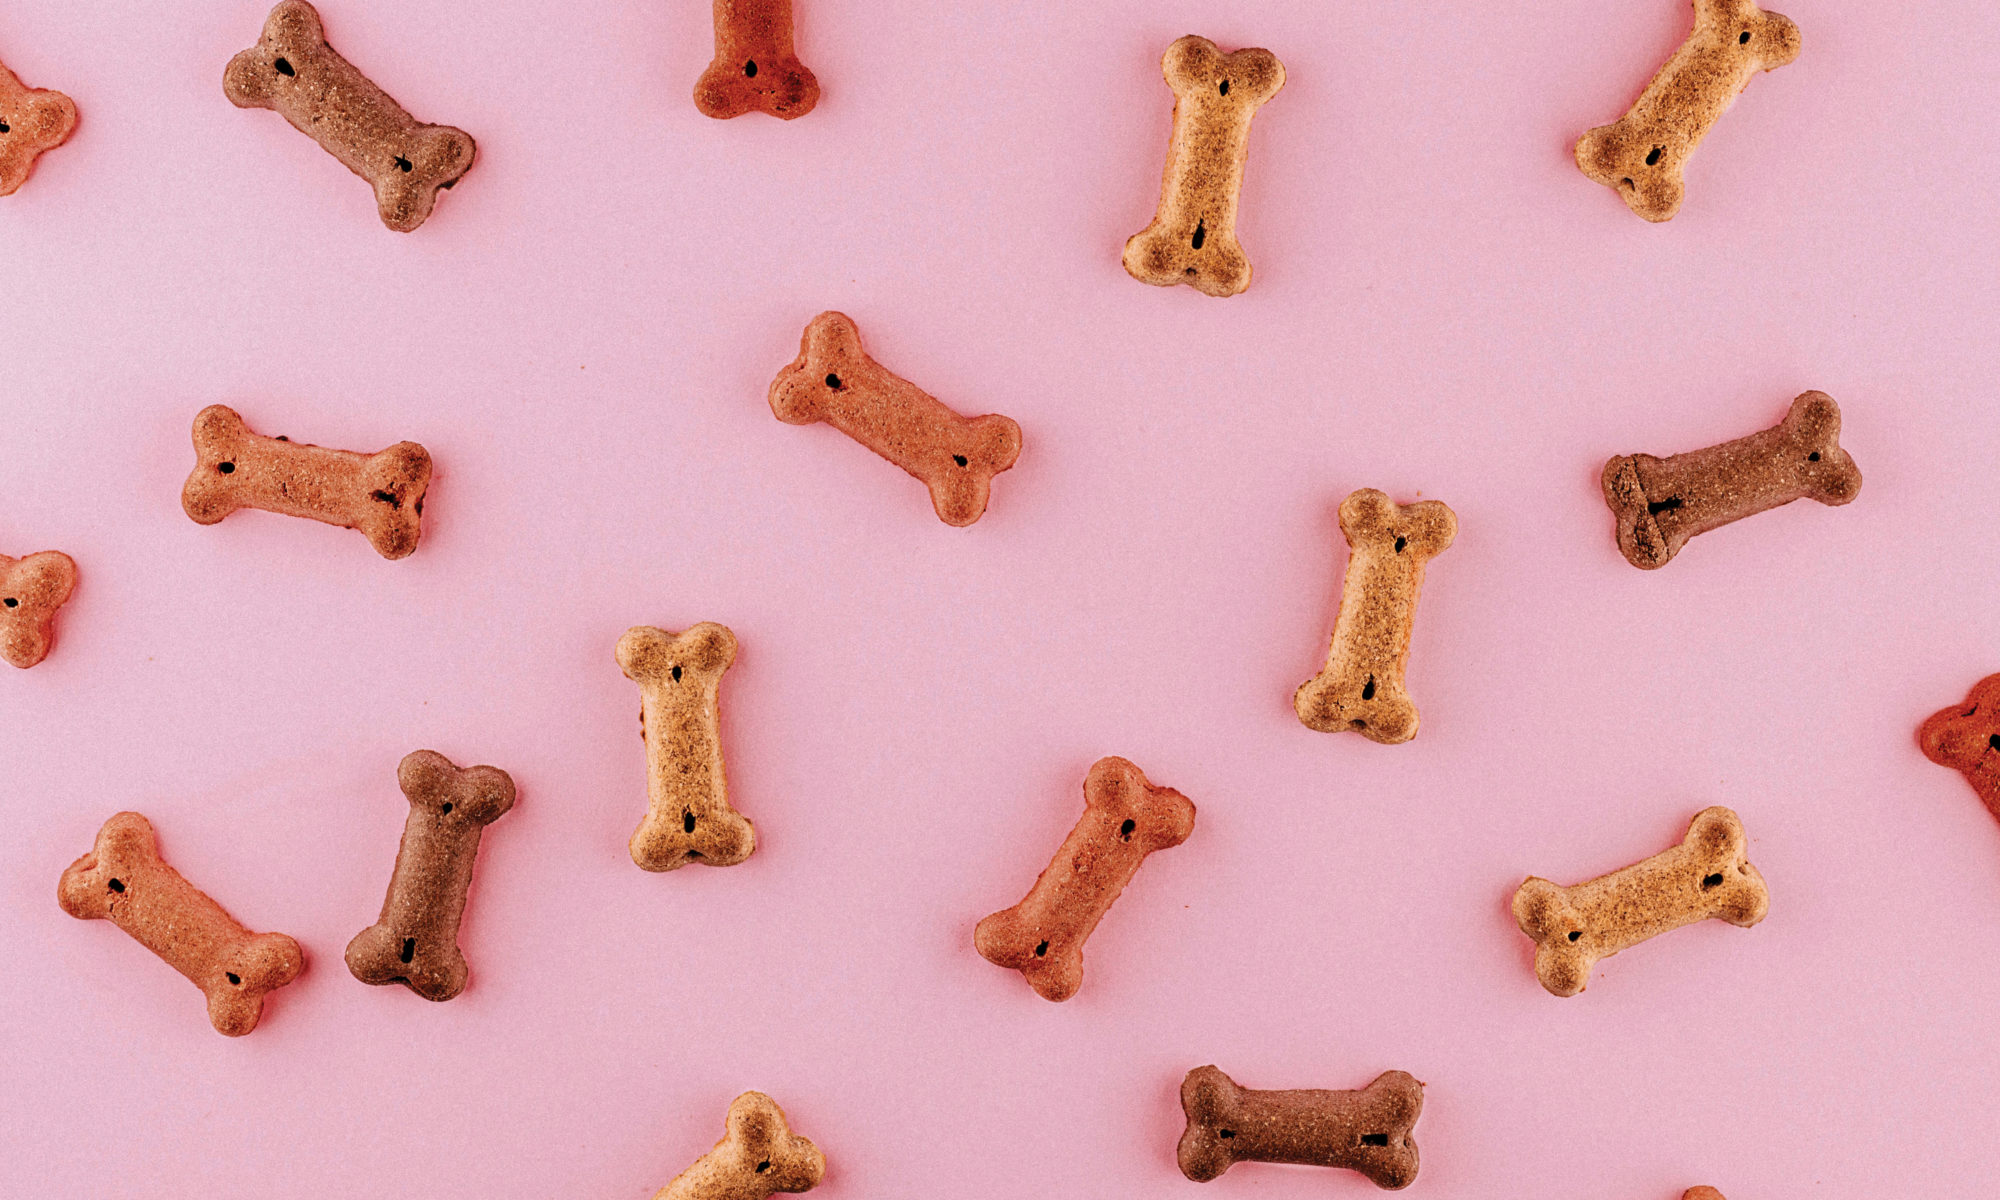 Photo of many small, bone-shaped dog treats scattered against a pink background